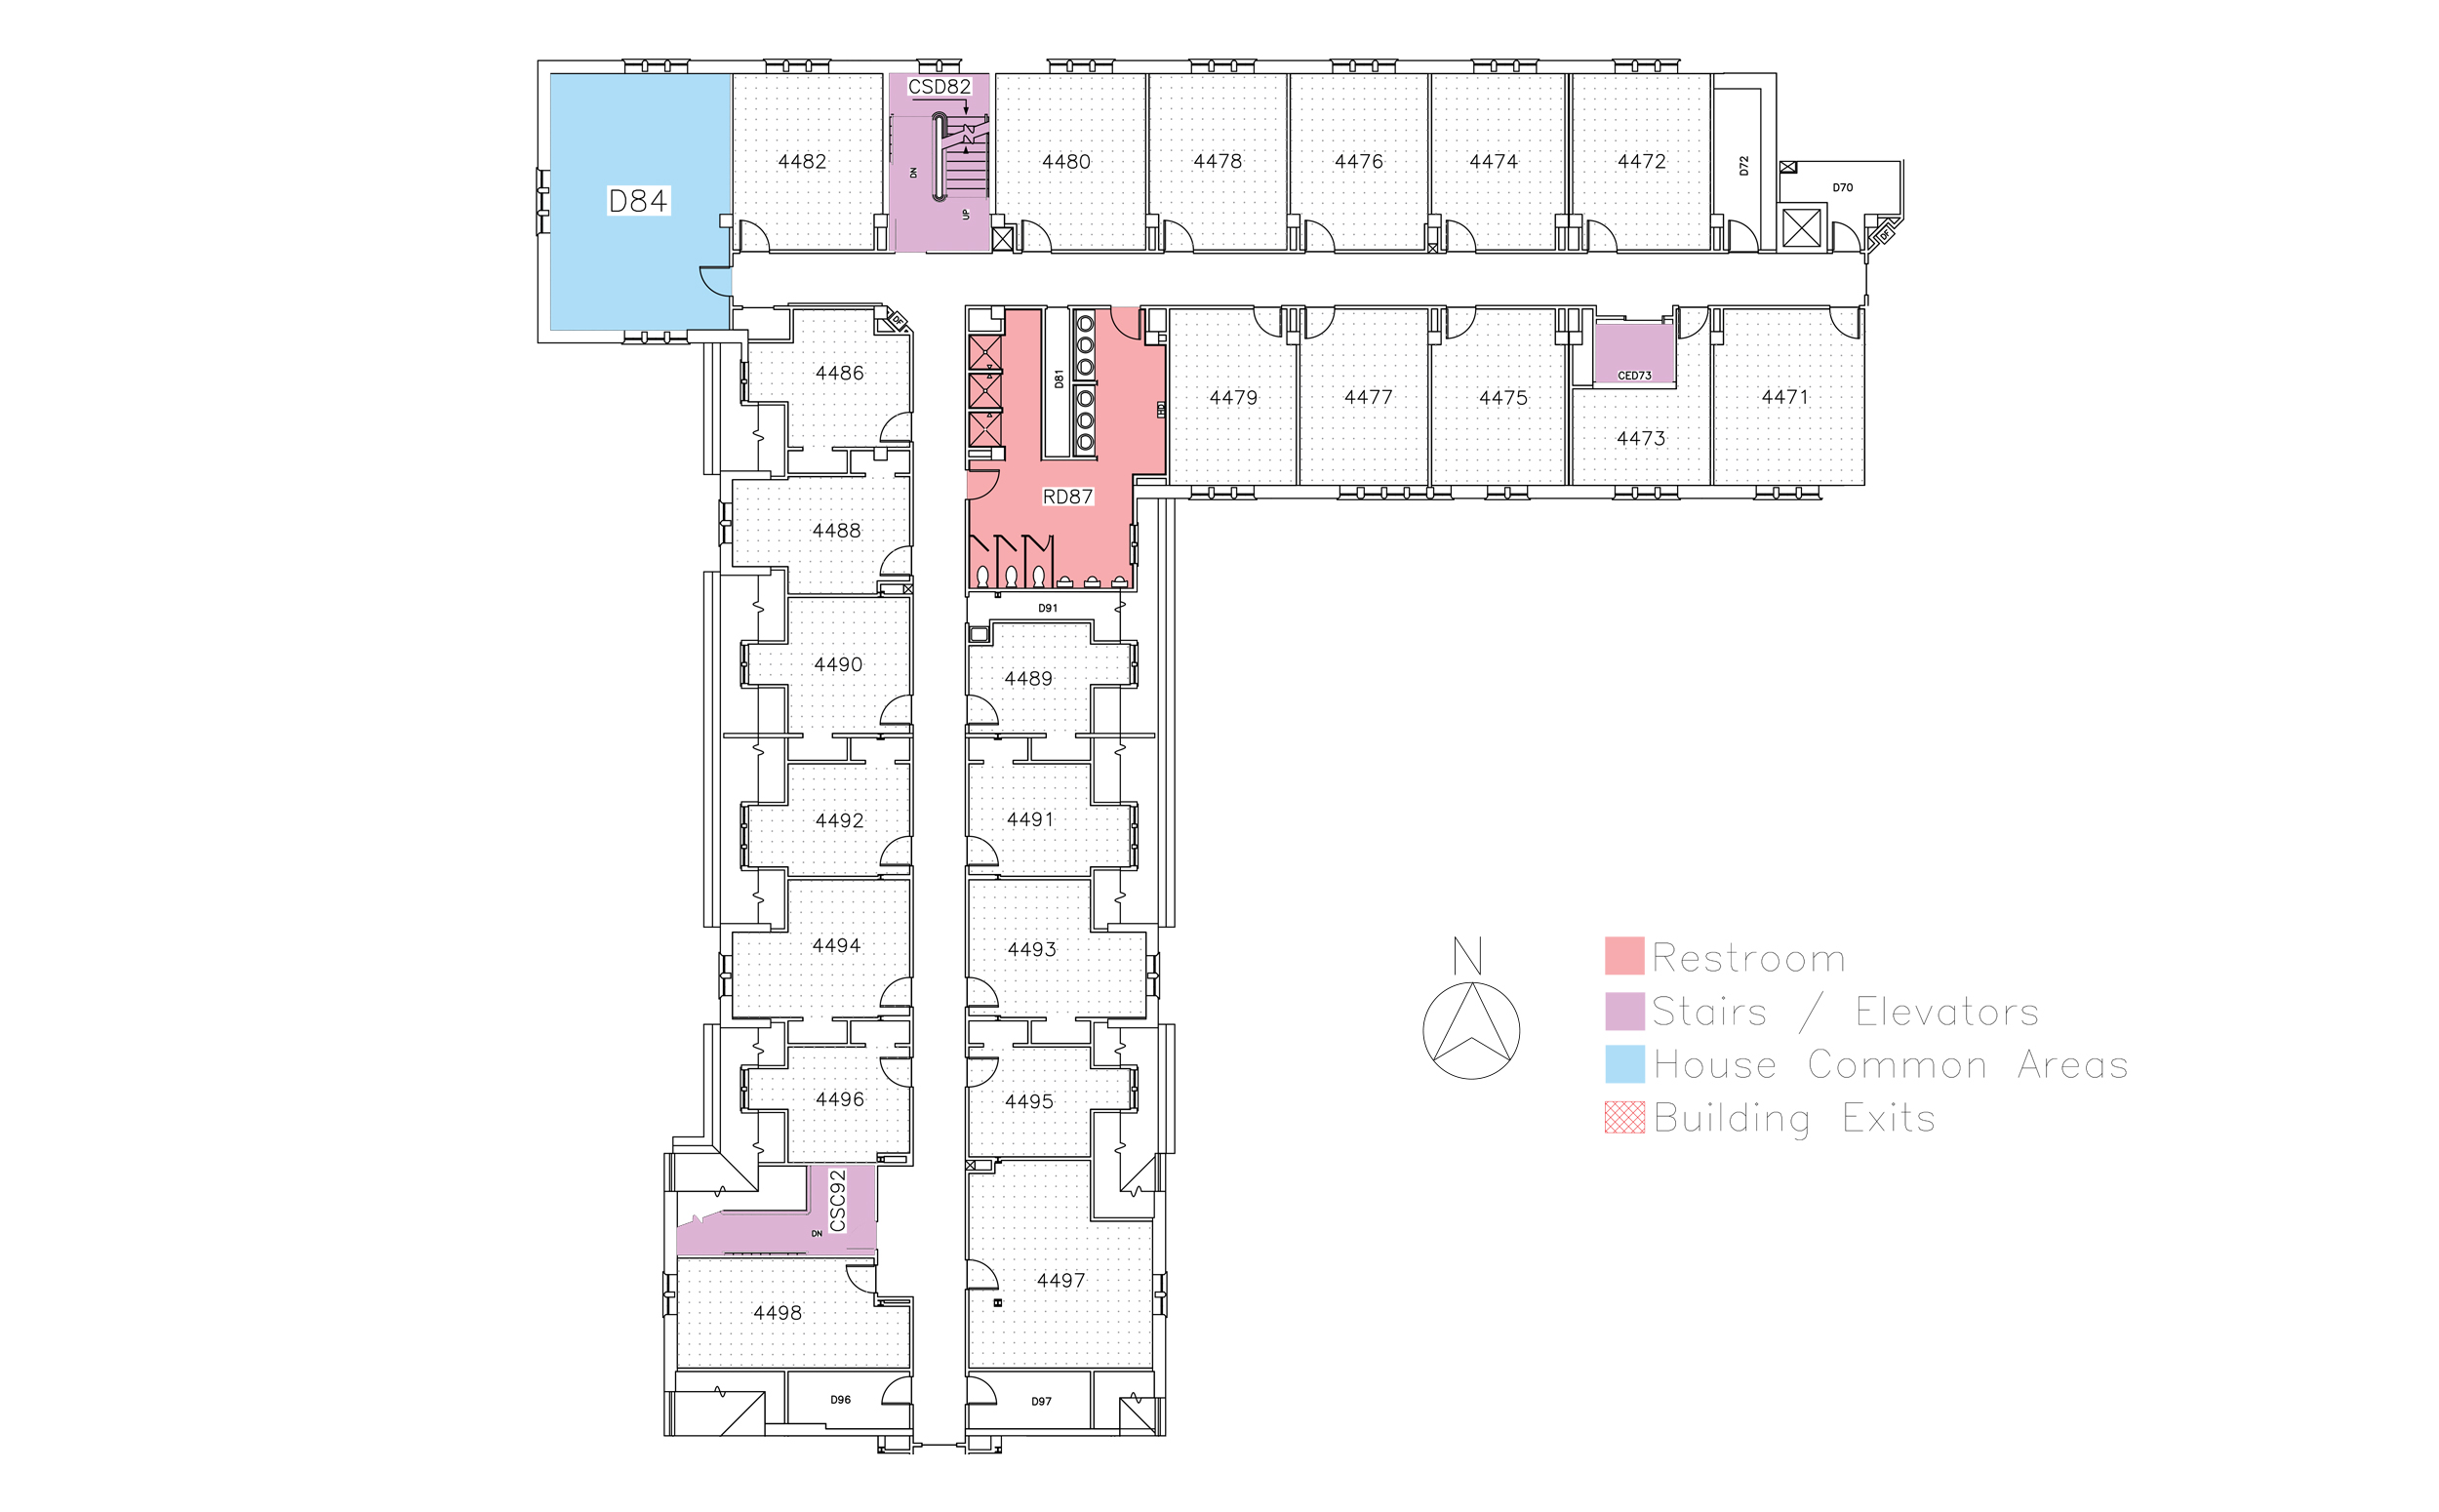 Floor plan for Converse House, fourth floor in Friley Hall. Identifies the location of rooms, bathrooms and common space.